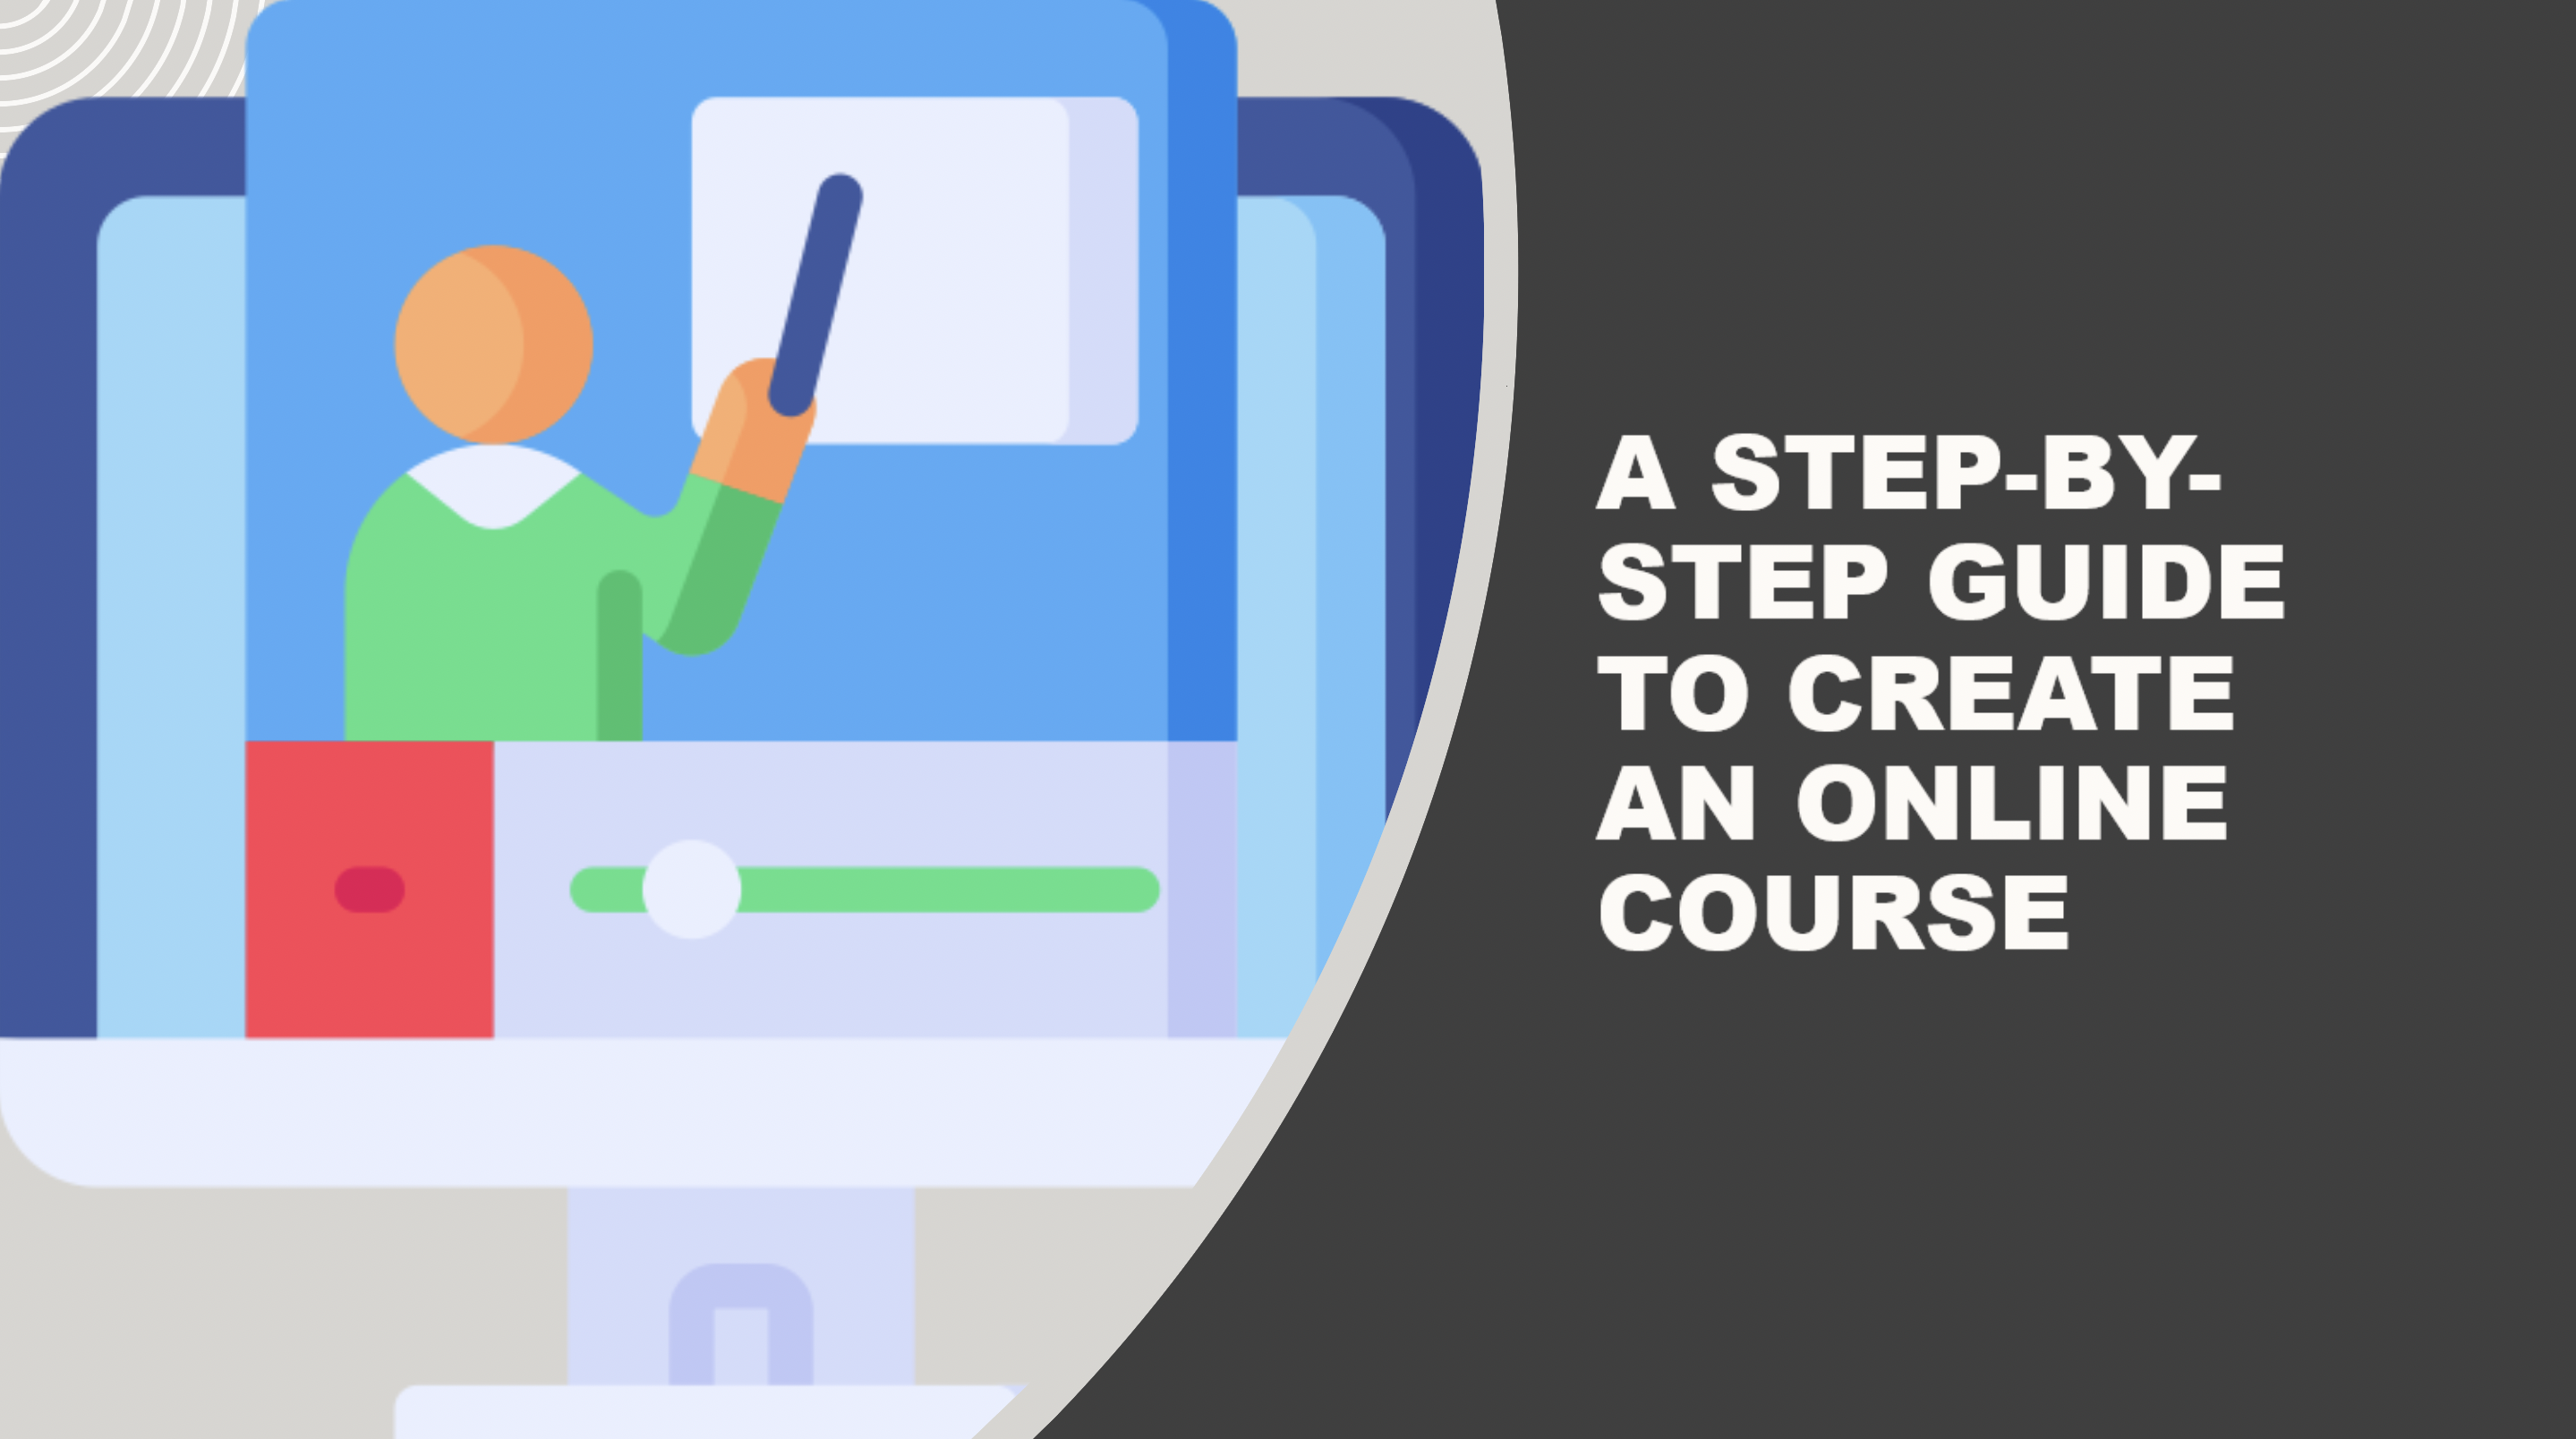 A step-by-step guide to create an online course